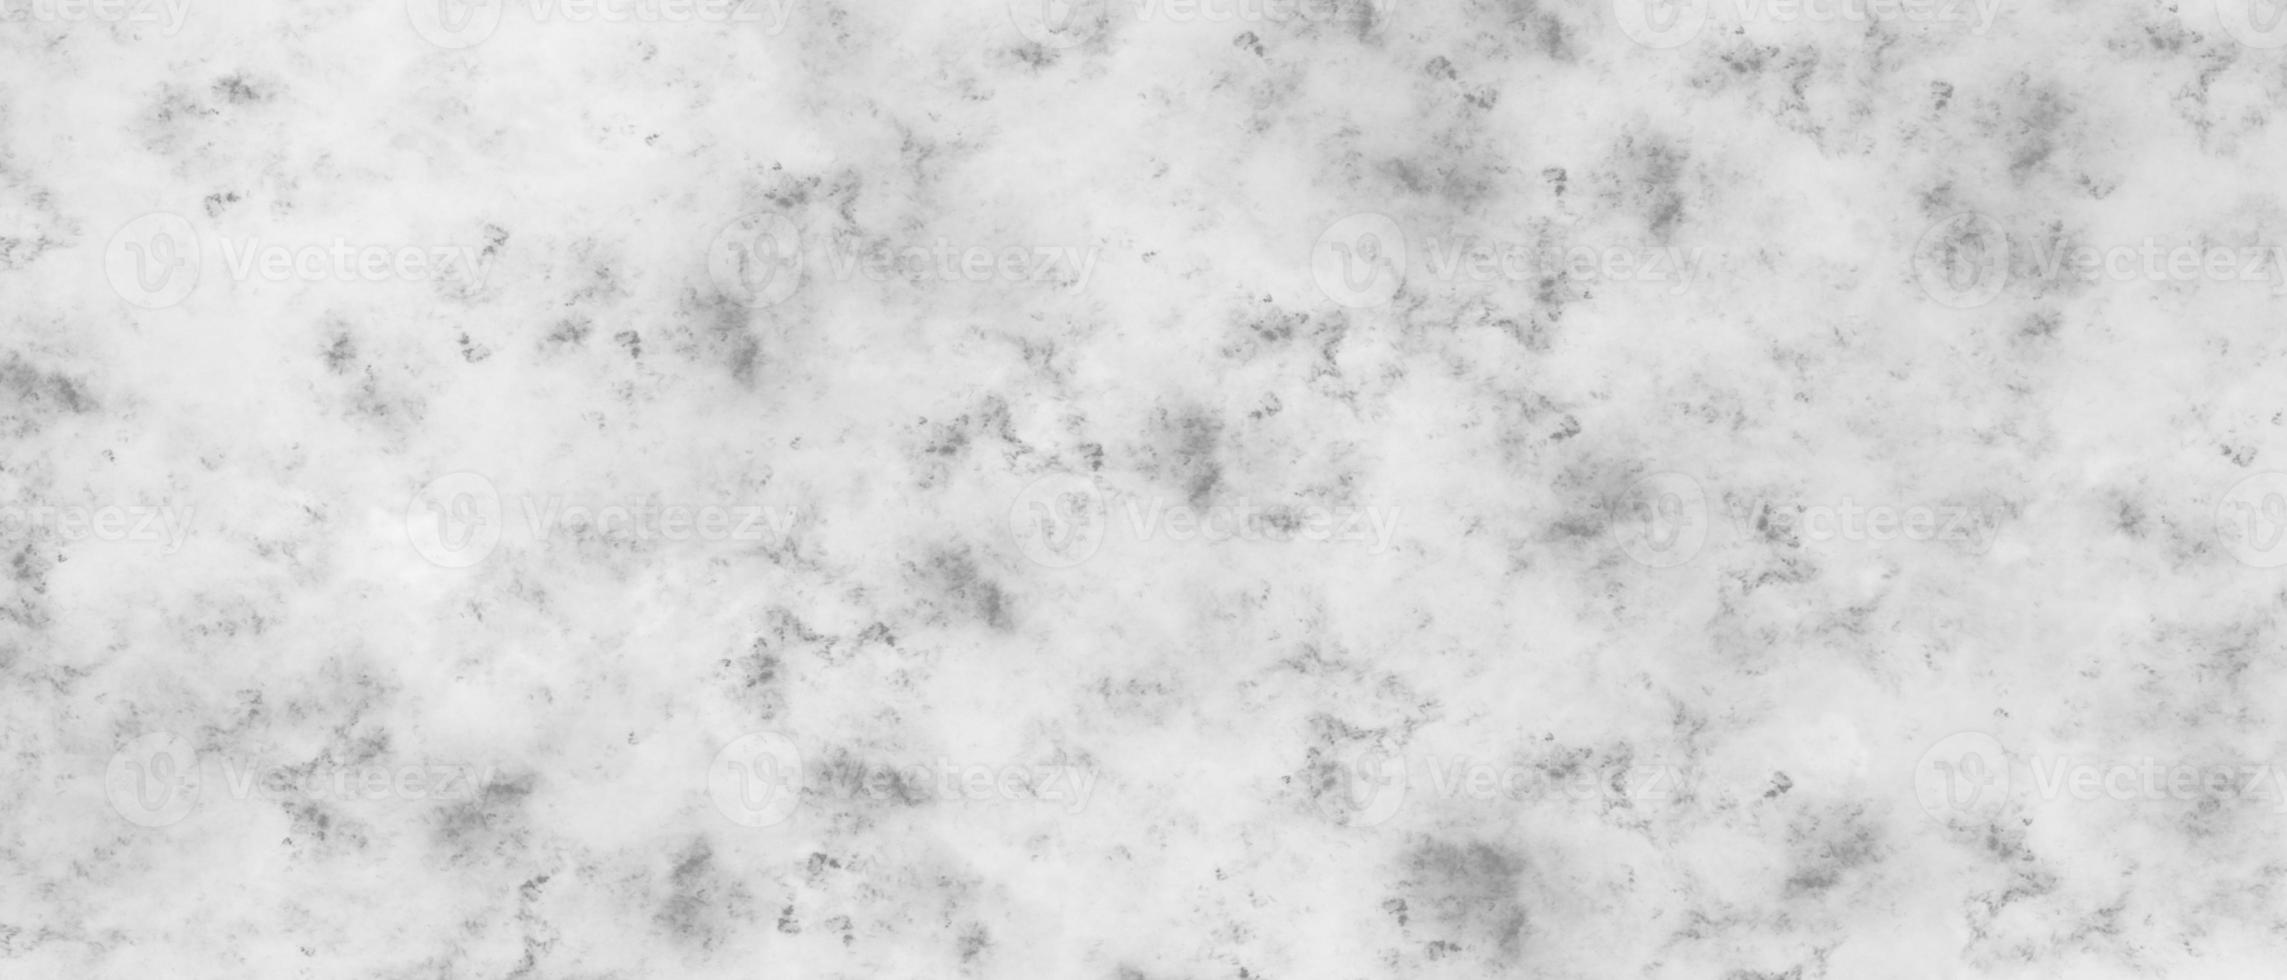 Black watercolor grunge background. Black white marble texture background. Tiles luxury stone floor seamless glitter for interior and exterior. Abstract fog distressed vintage grunge. photo